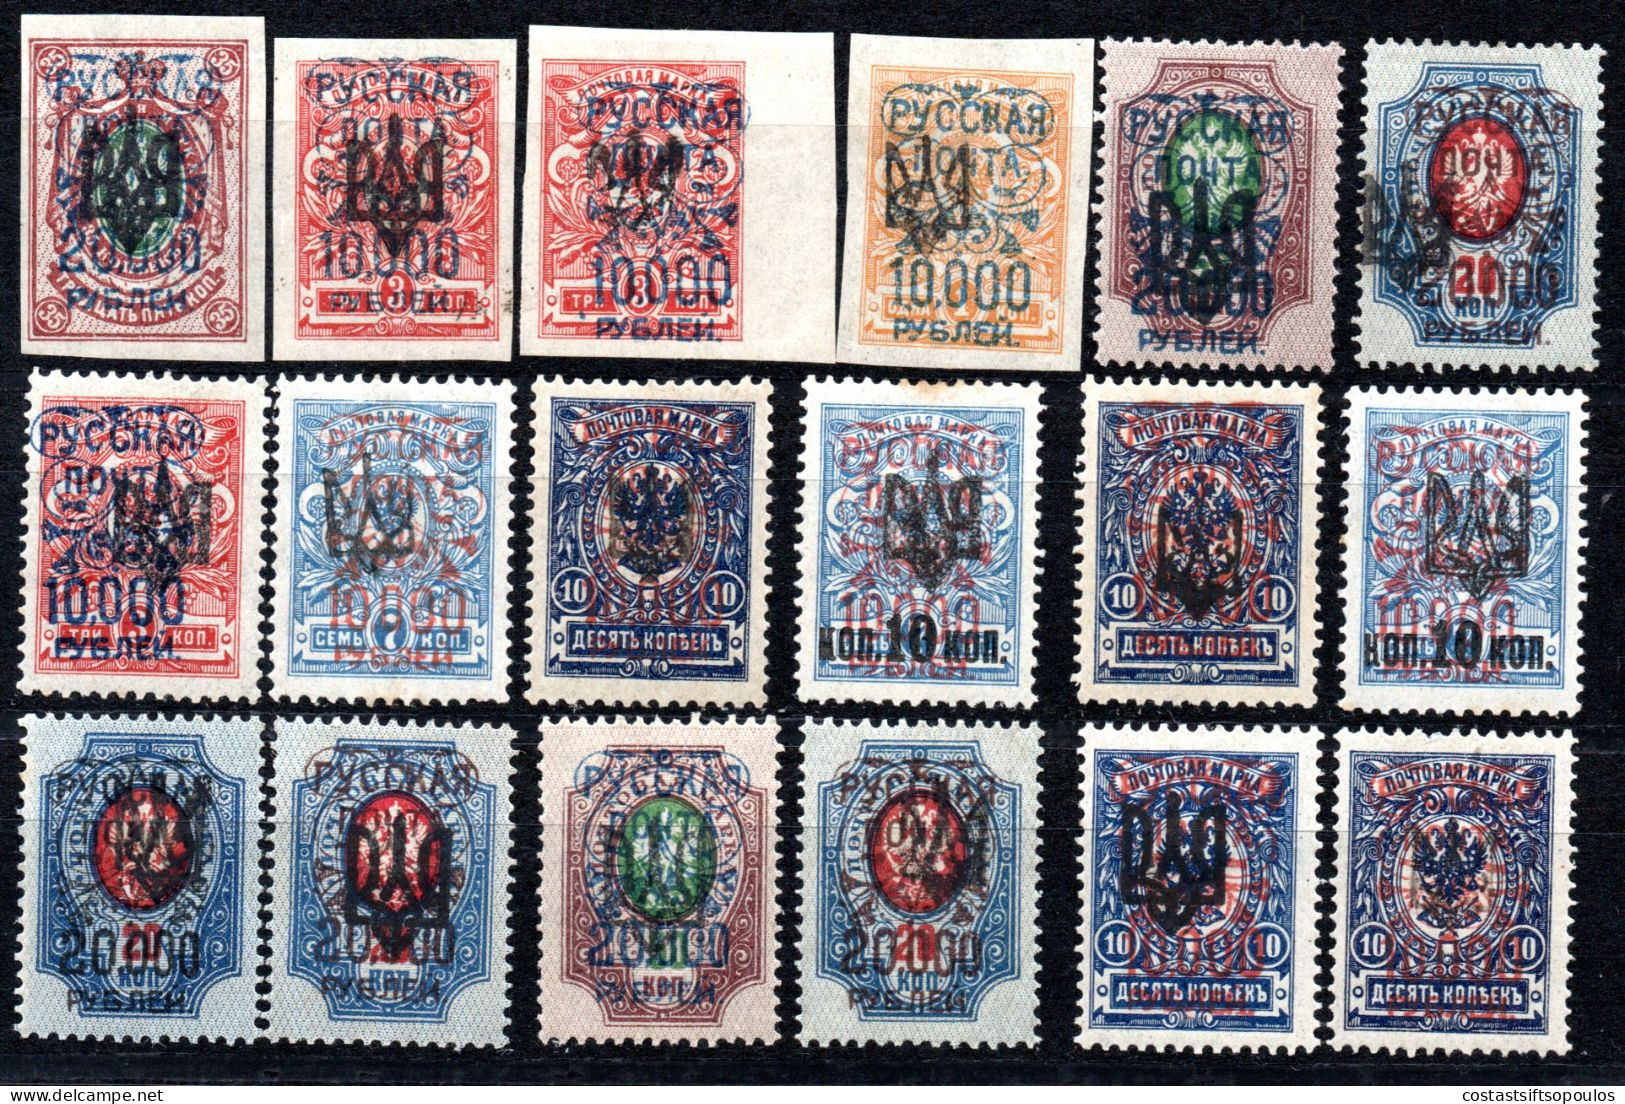 2674. RUSSIA LEVANT 1921 18 WRANGEL ISSUE ST.LOT ON UKRAINE, MOSTLY MNH. - Levant